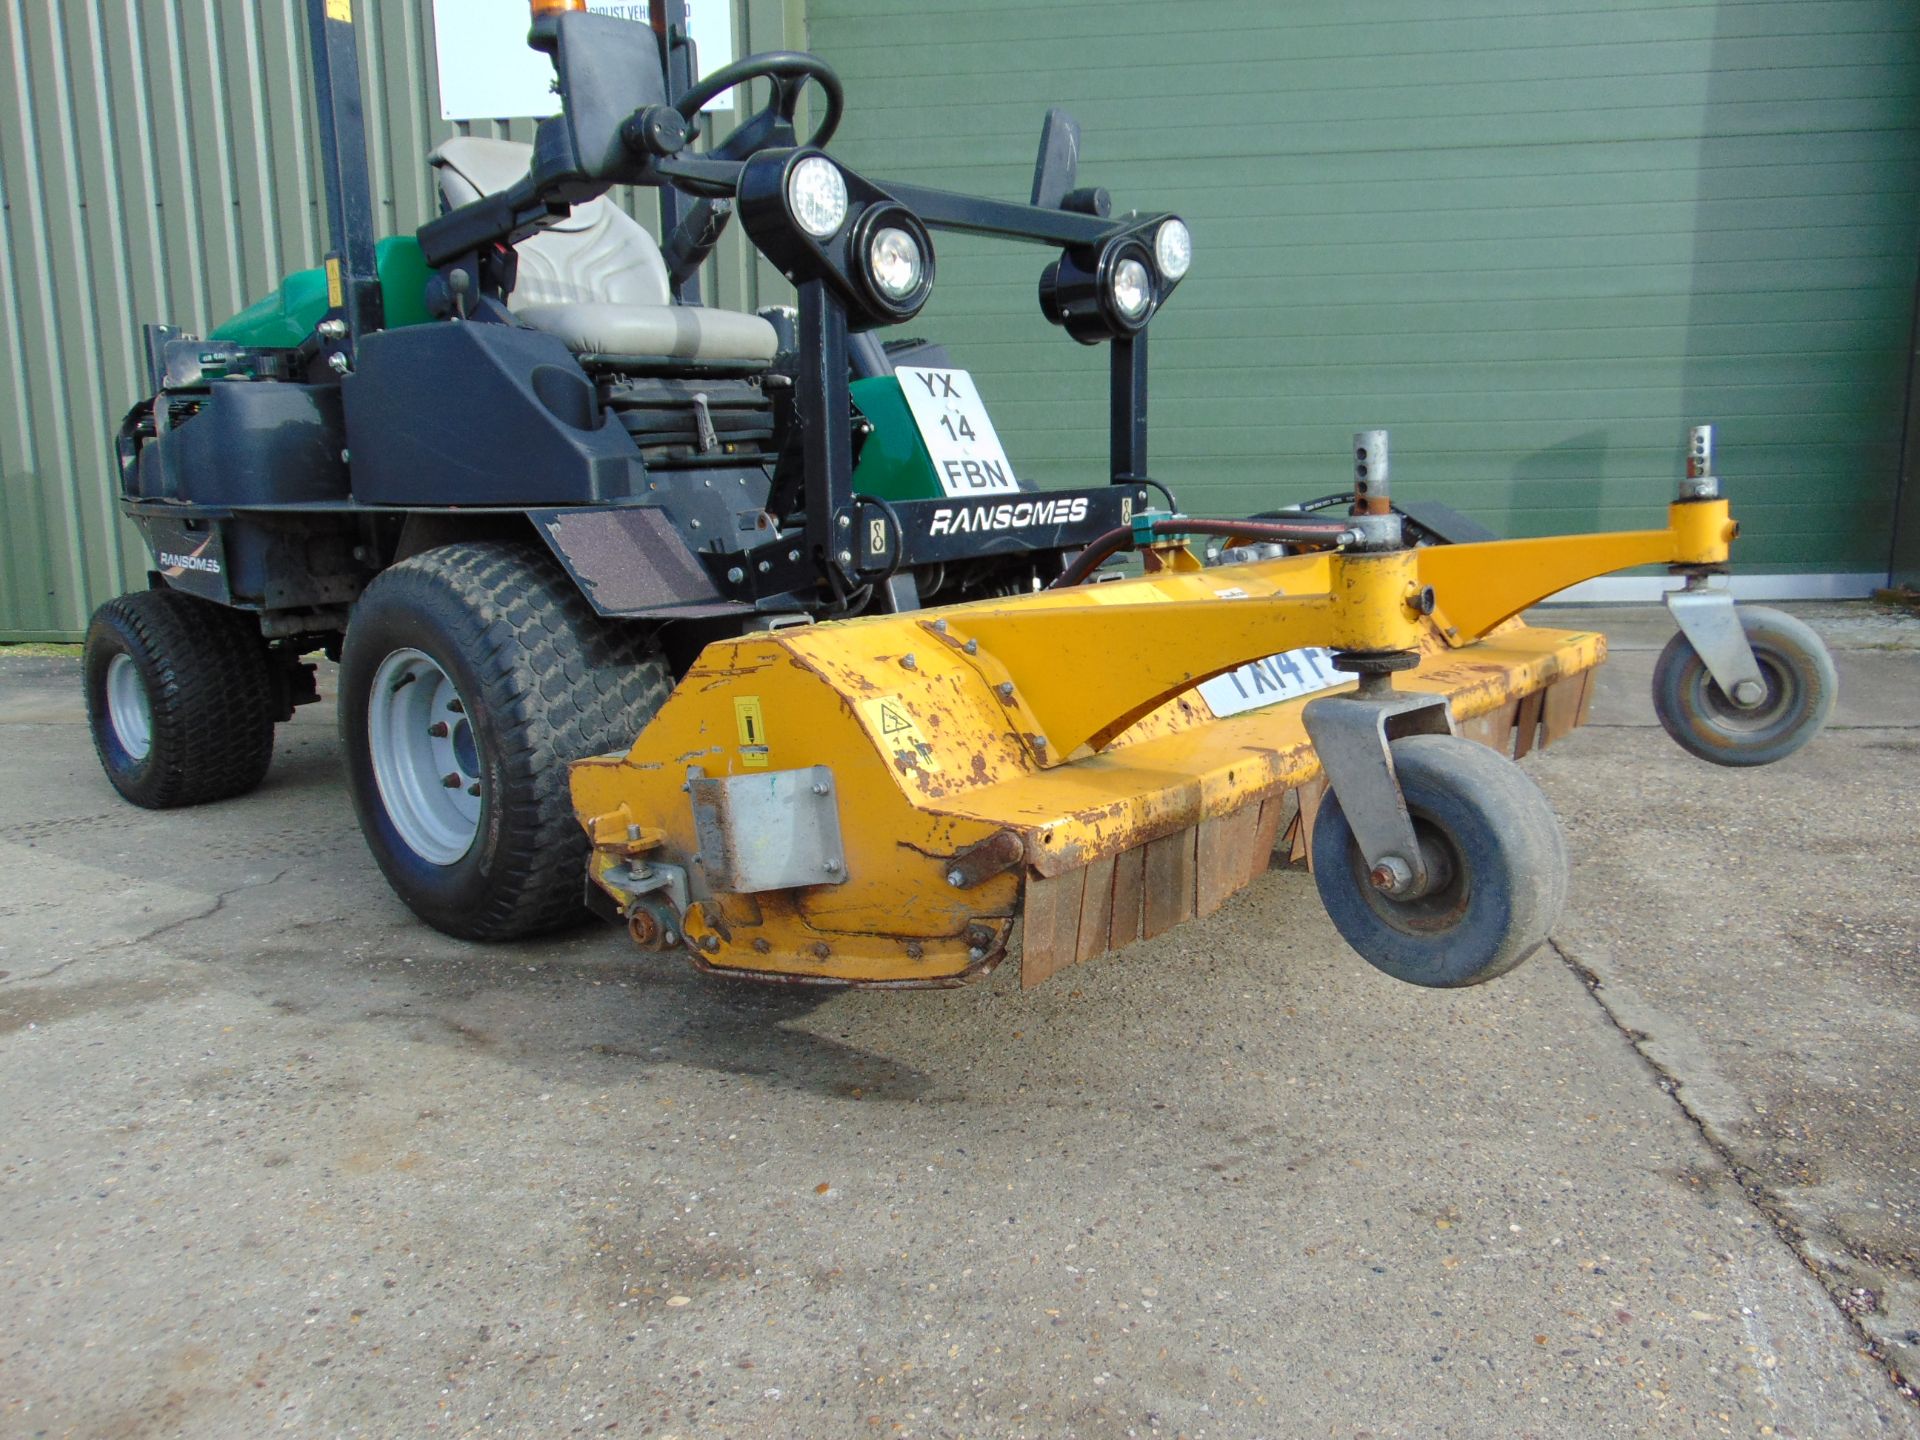 2014 Ransomes HR300 C/W Muthing Outfront Flail Mower ONLY 2,203 HOURS! - Image 10 of 26